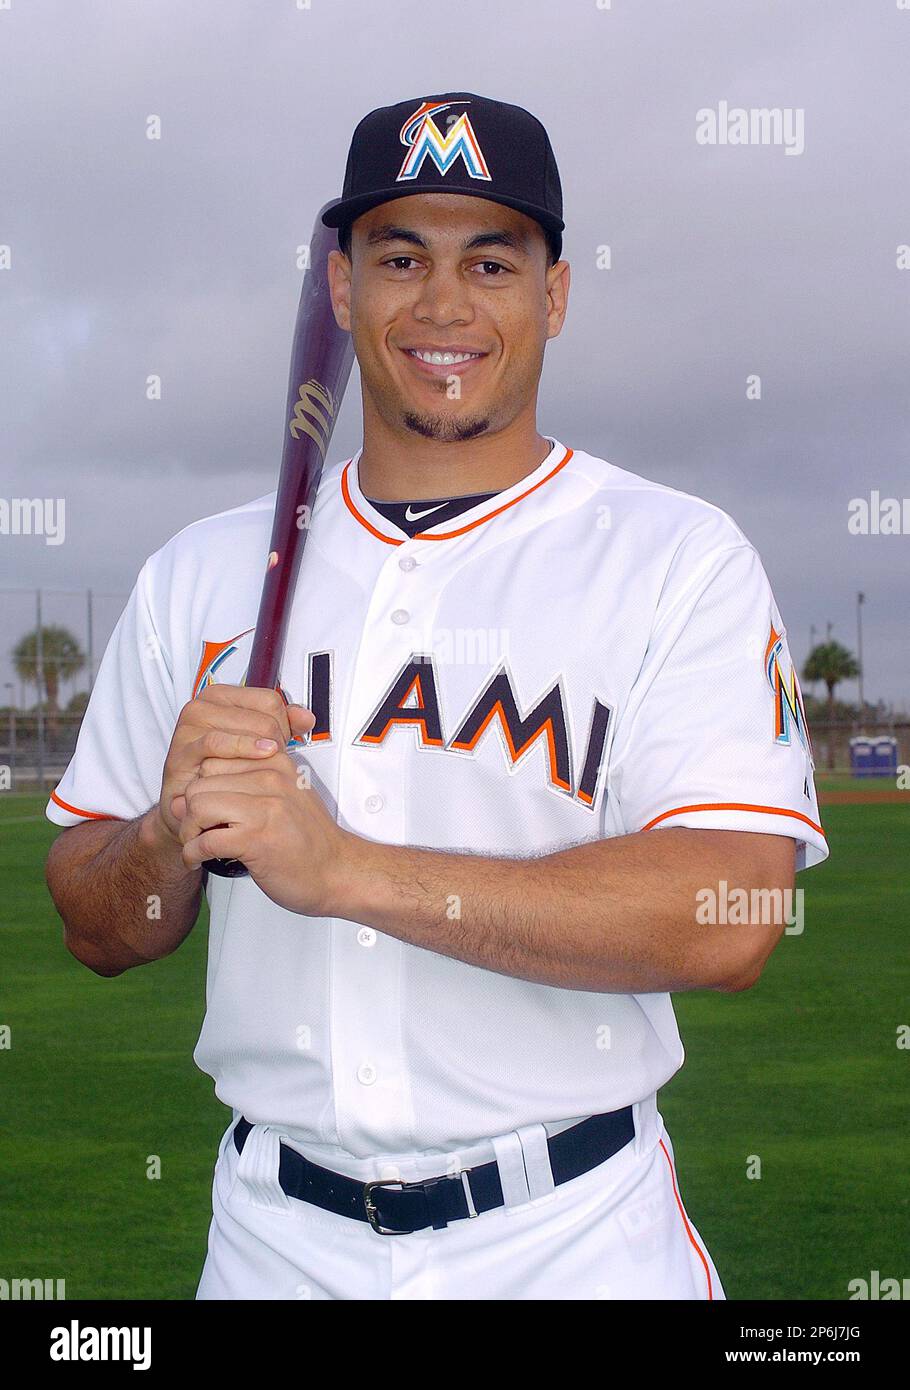 Jupiter, Florida February 27, 2012 Miami Marlins Outfielder Gioncarlo  Stanton during Spring Training. (AP Photo/Steve Moore Stock Photo - Alamy